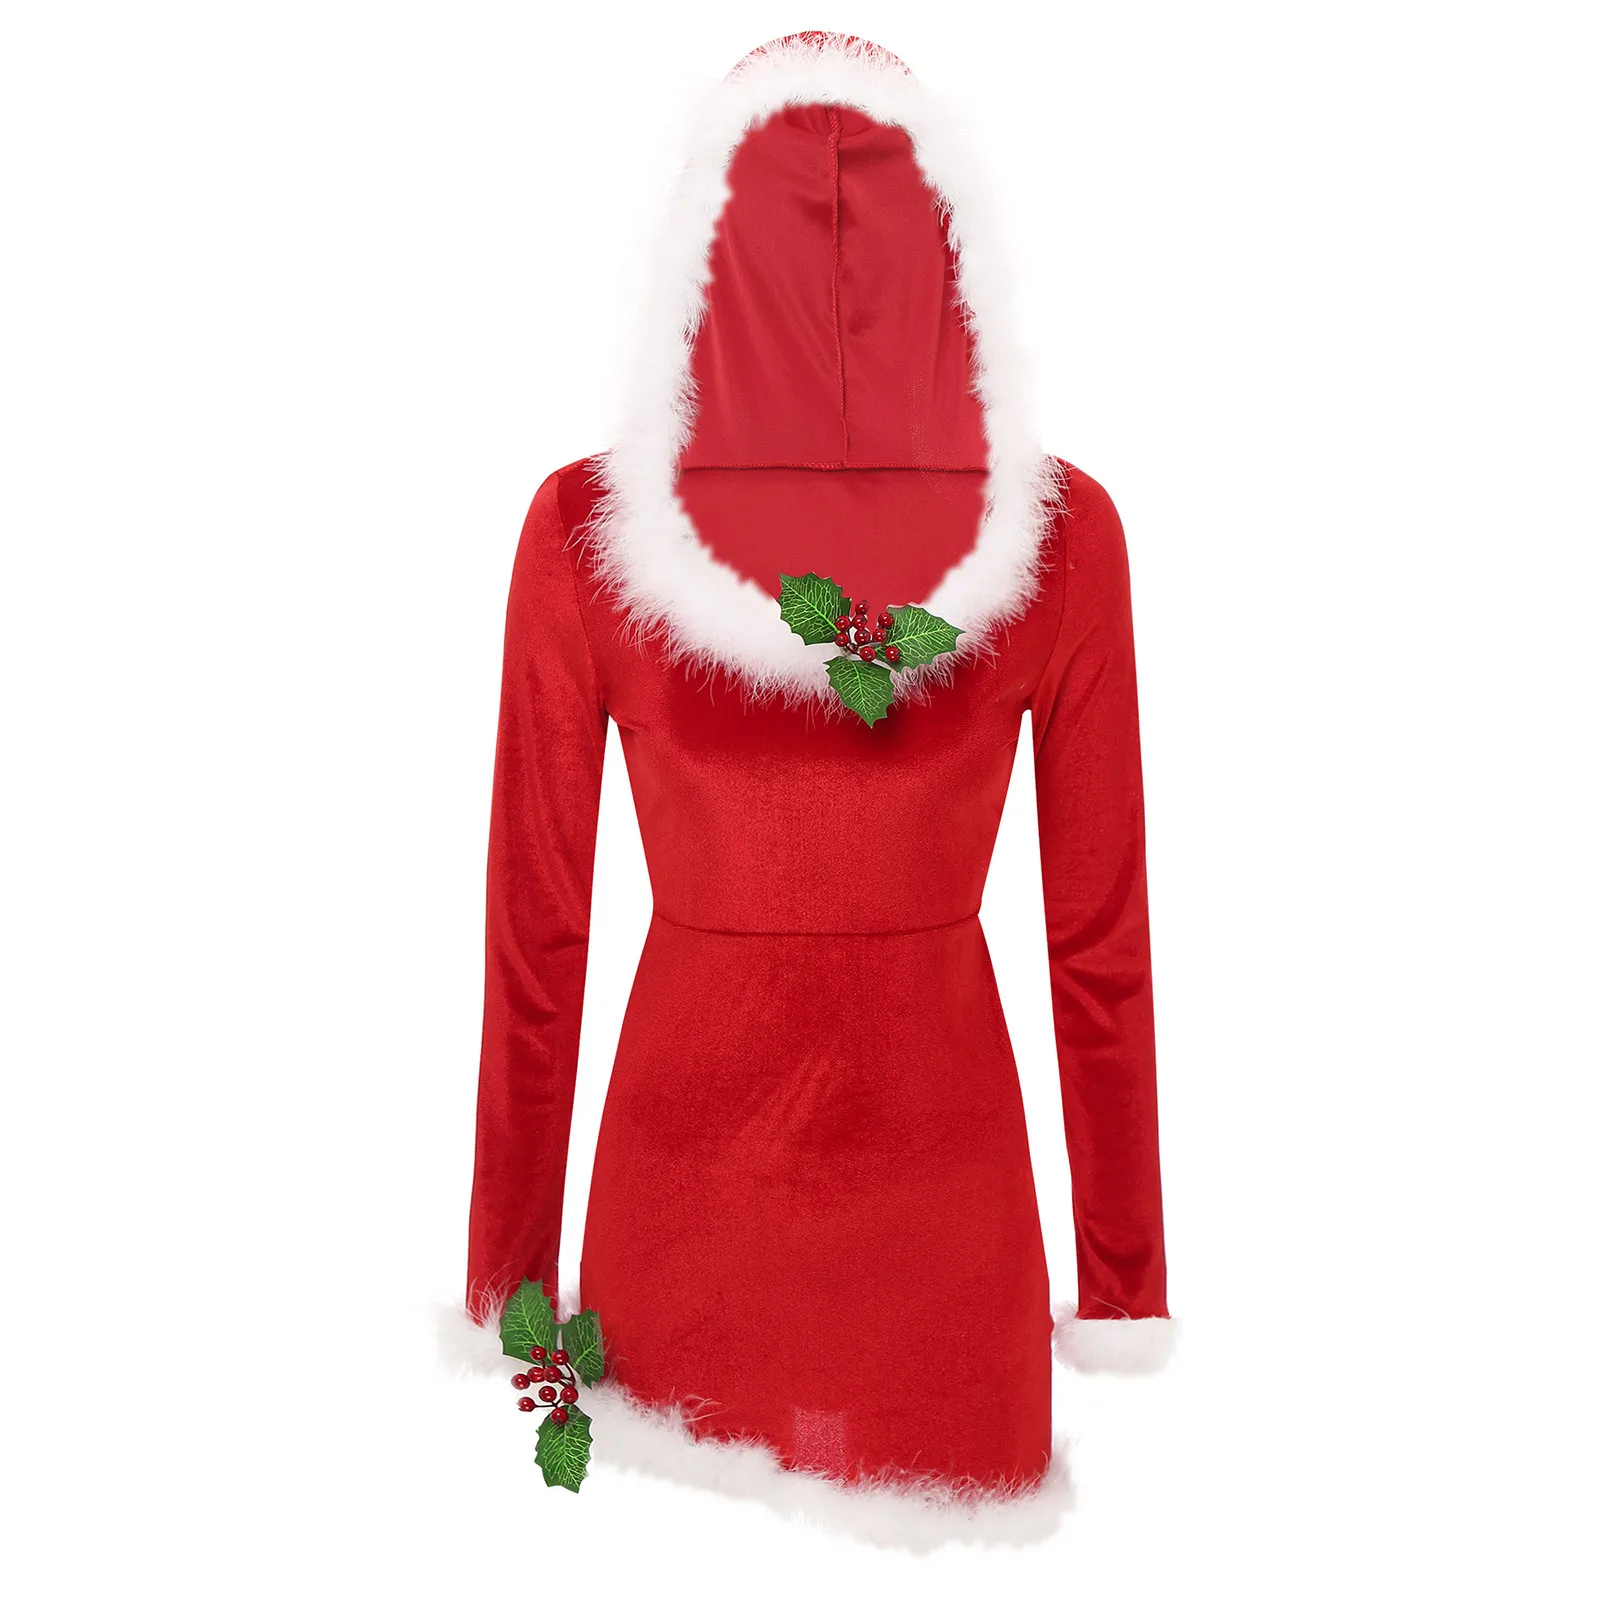 

Women Christmas Santa Claus Cosplay Costume Long Sleeve Feather Trim Velvet Hooded Dresses Xmas New Year Party Clothes Clubwear